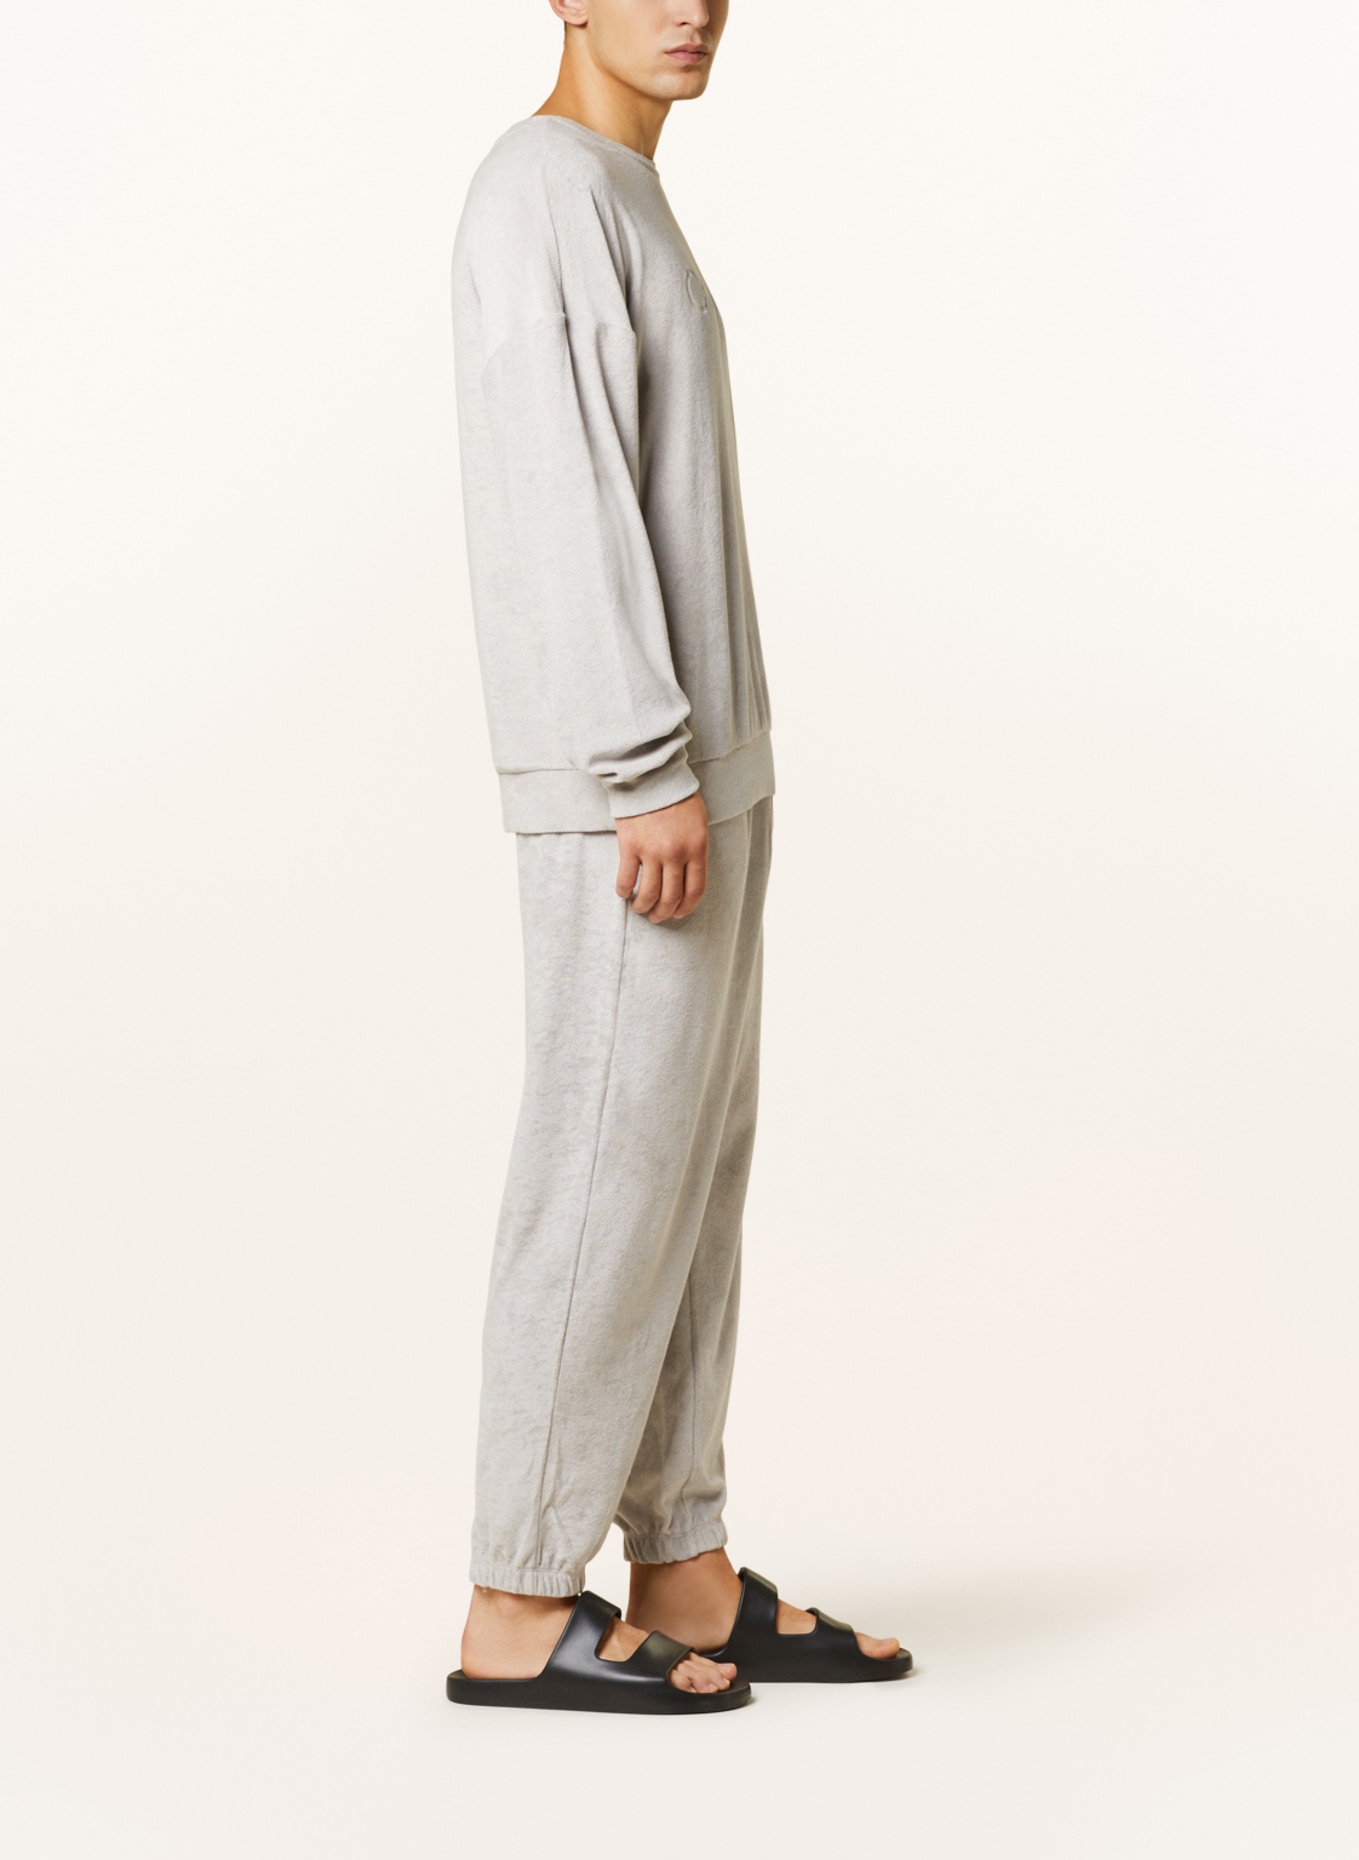 Calvin Klein Lounge pants made of terry cloth, Color: LIGHT GRAY (Image 4)